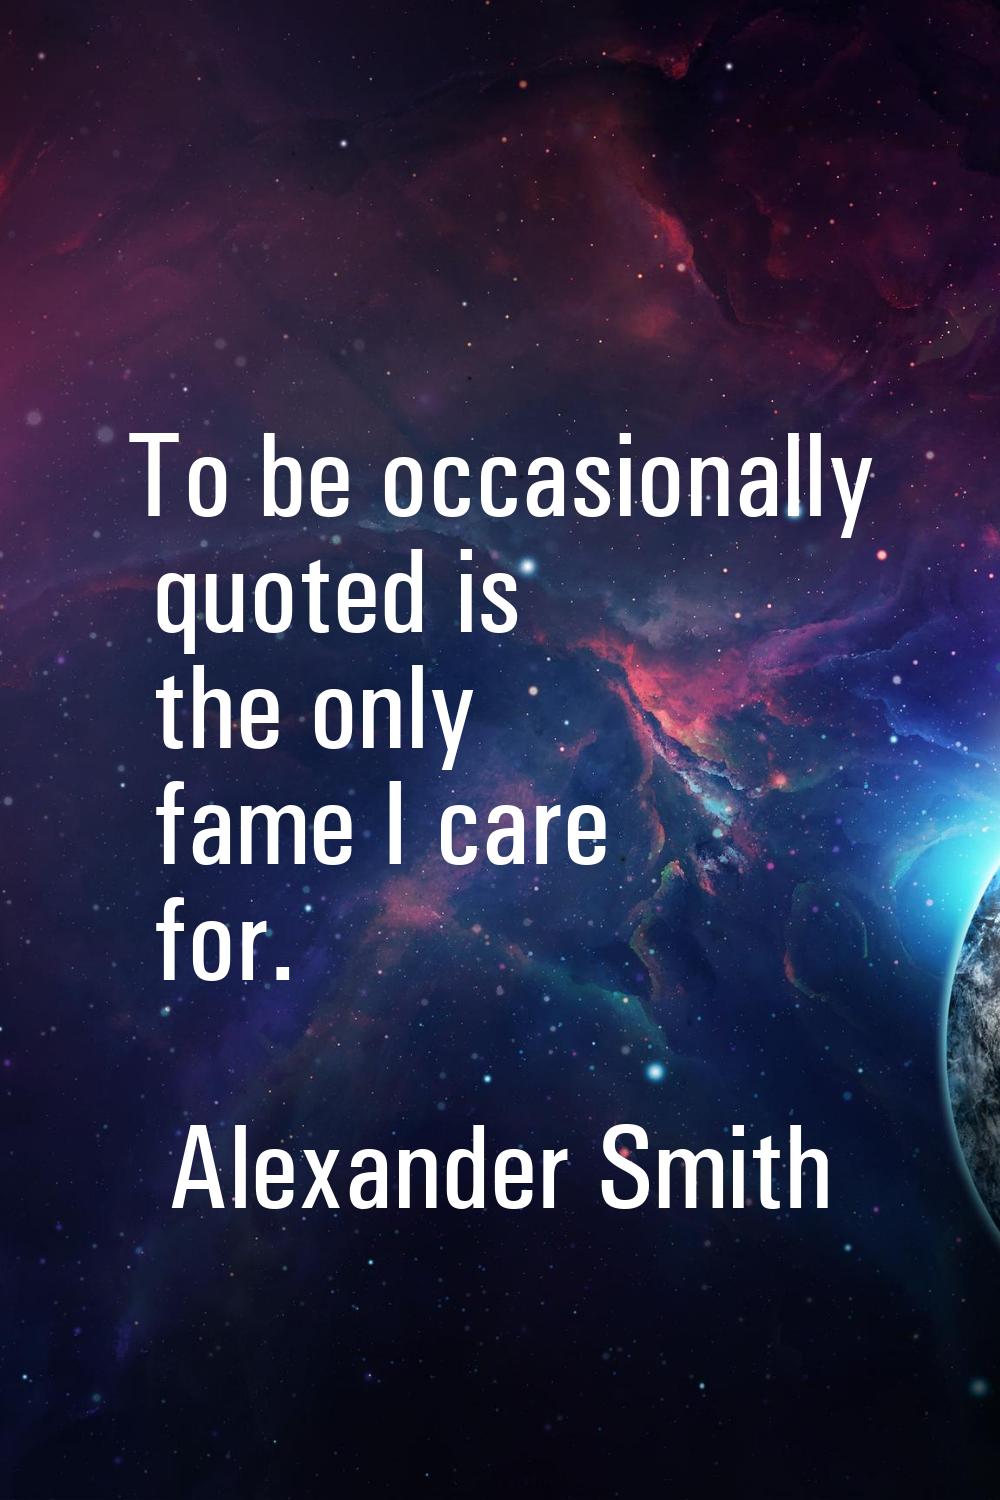 To be occasionally quoted is the only fame I care for.